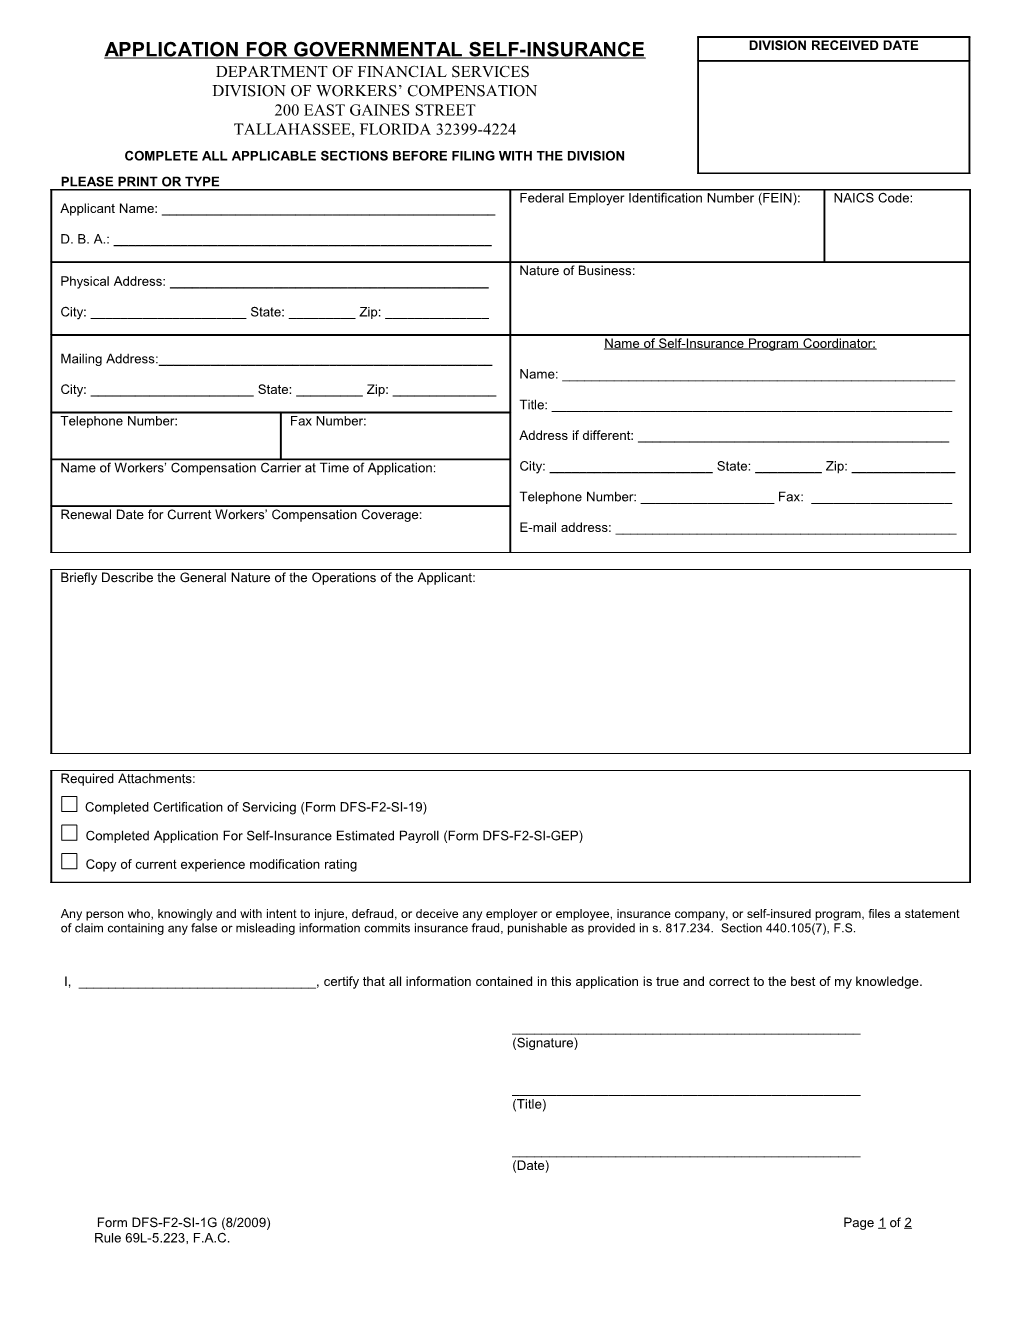 Application for Governmental Self-Insurance